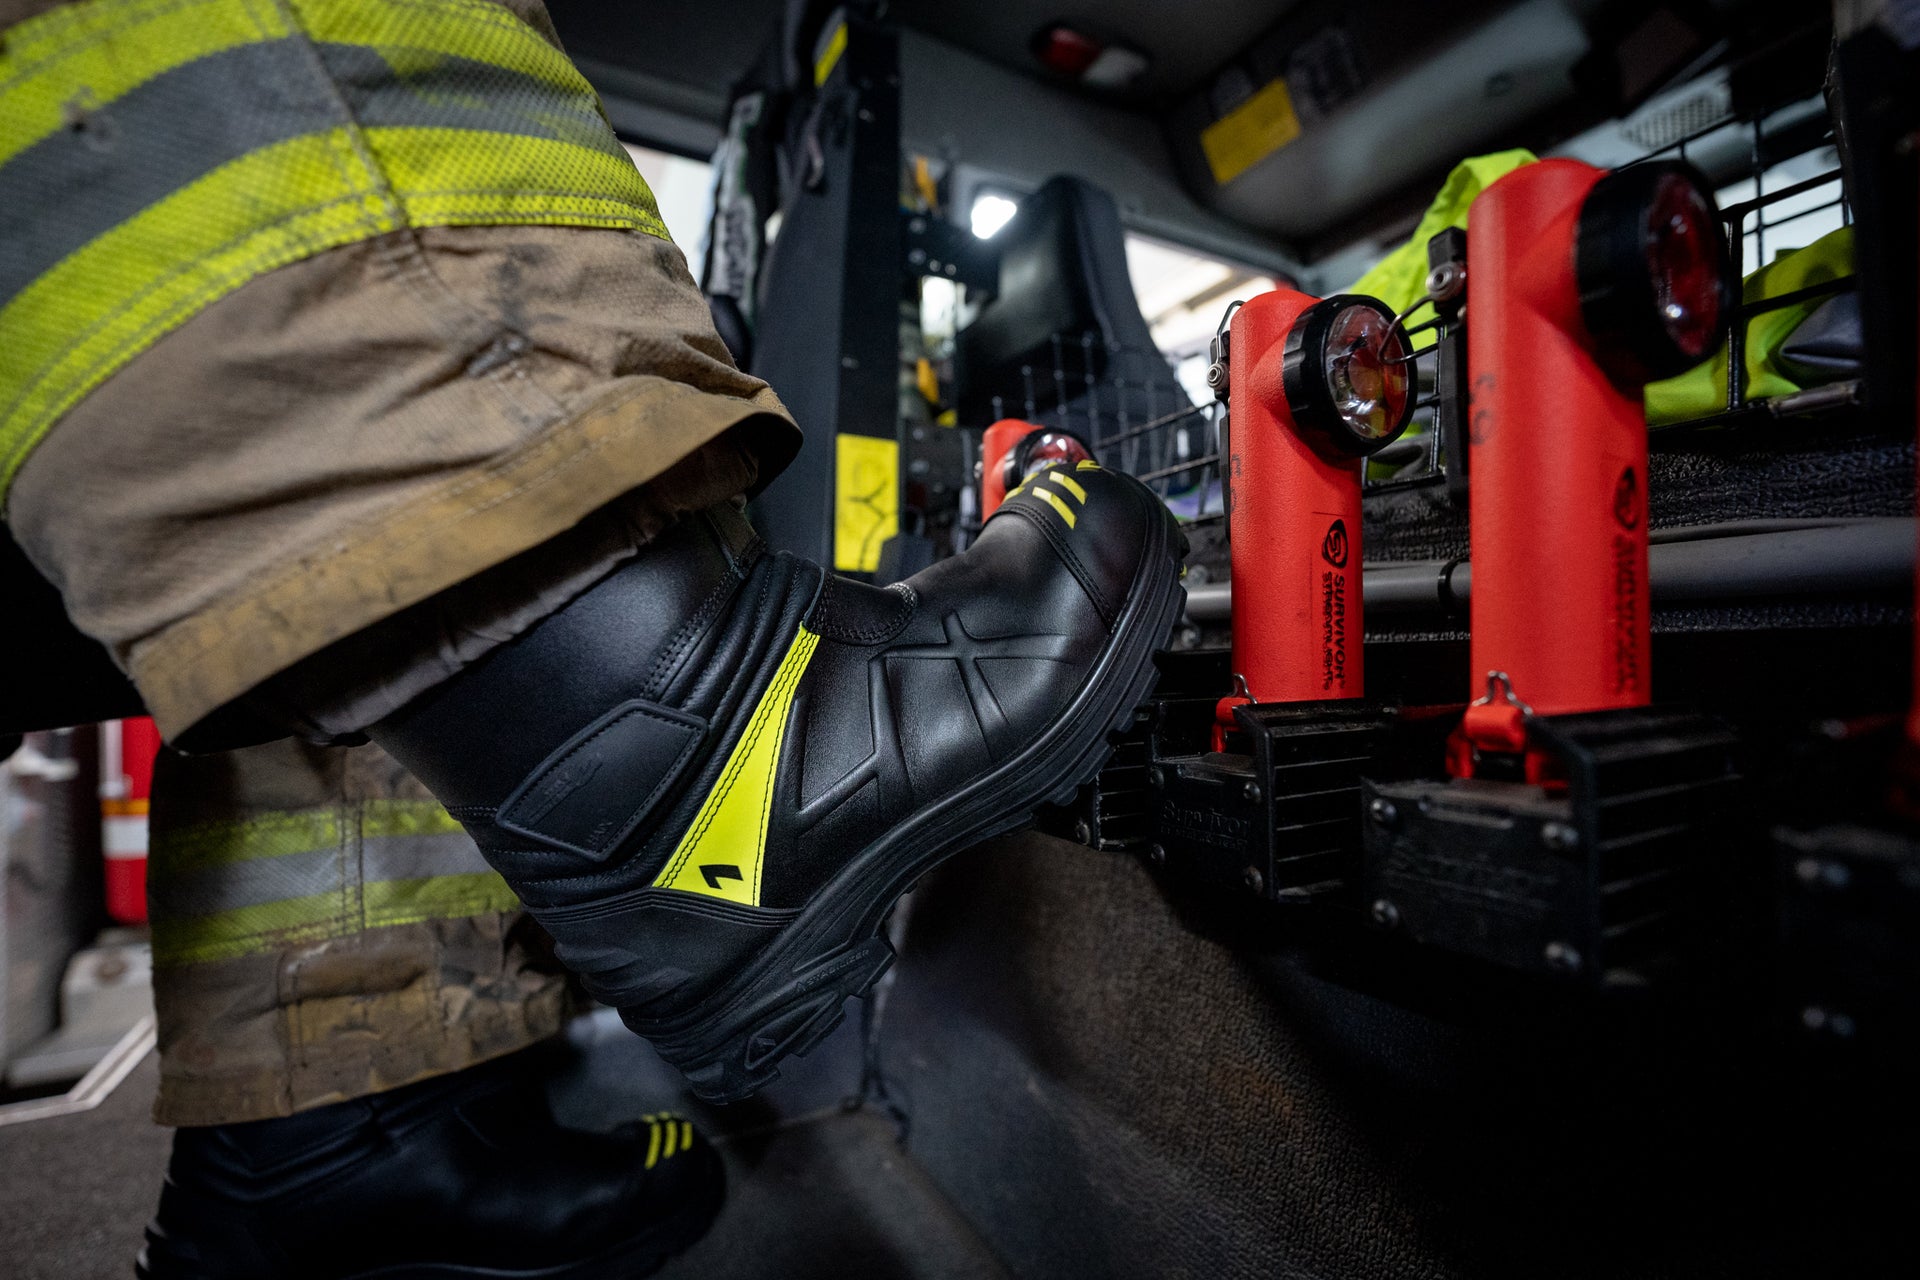 HAIX Fire Eagle Air Women's Boots (507503) | Fire Store | Fuego Fire Center | Firefighter Gear | The new HAIX Fire Eagle® Air boots set the standard for the modern day firefighter. These lightweight structural bunker boots have an athletic fit and feel, yet offer the highest degree of protection when on the frontline of a firefight. HAIX Fire Eagle® Air boots will keep you lighter and quicker on your feet and more responsive to the fire.